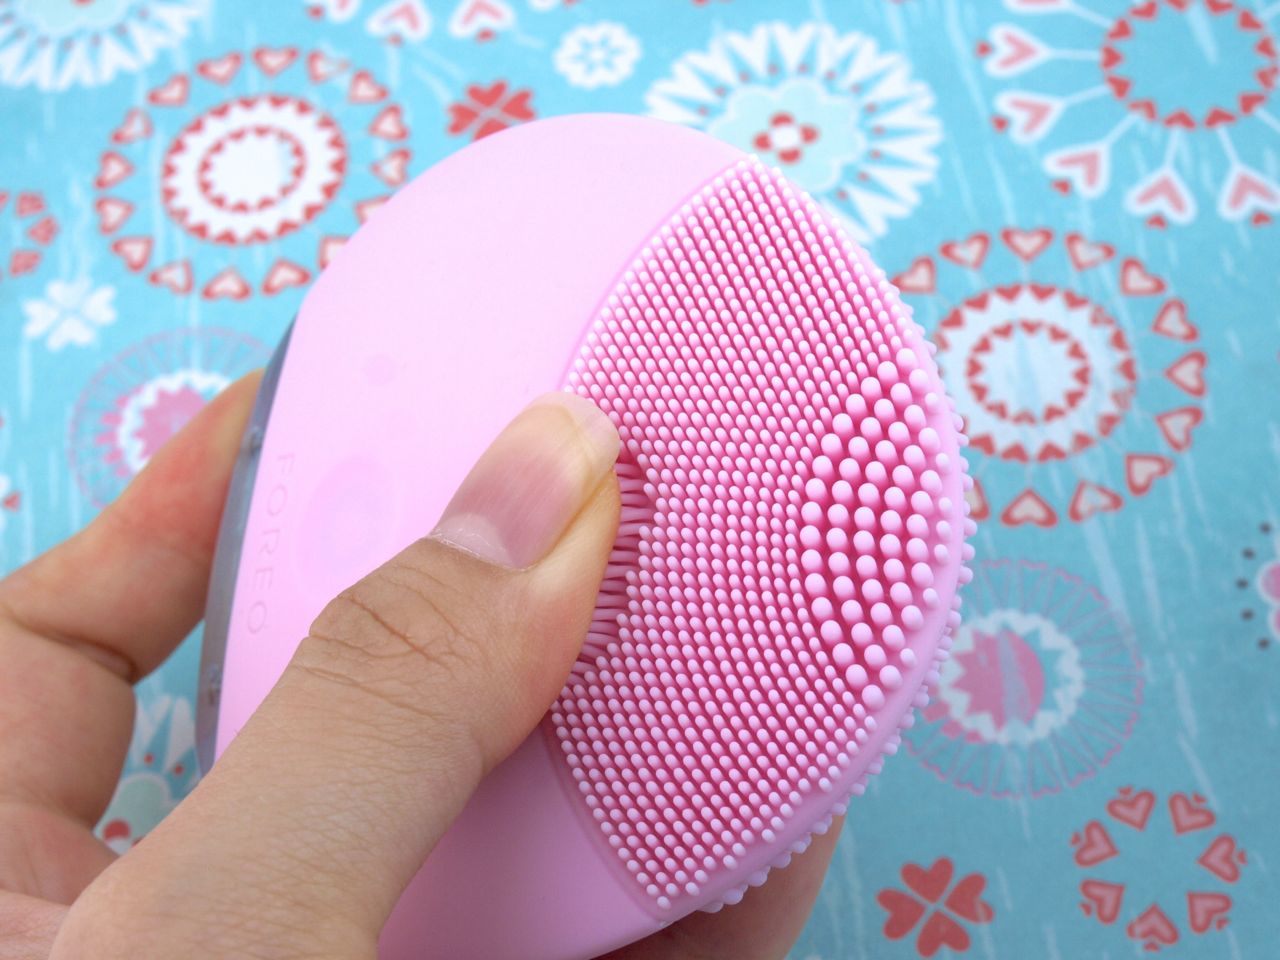 Foreo Luna Mini T-Sonic Facial Cleansing Device: Review